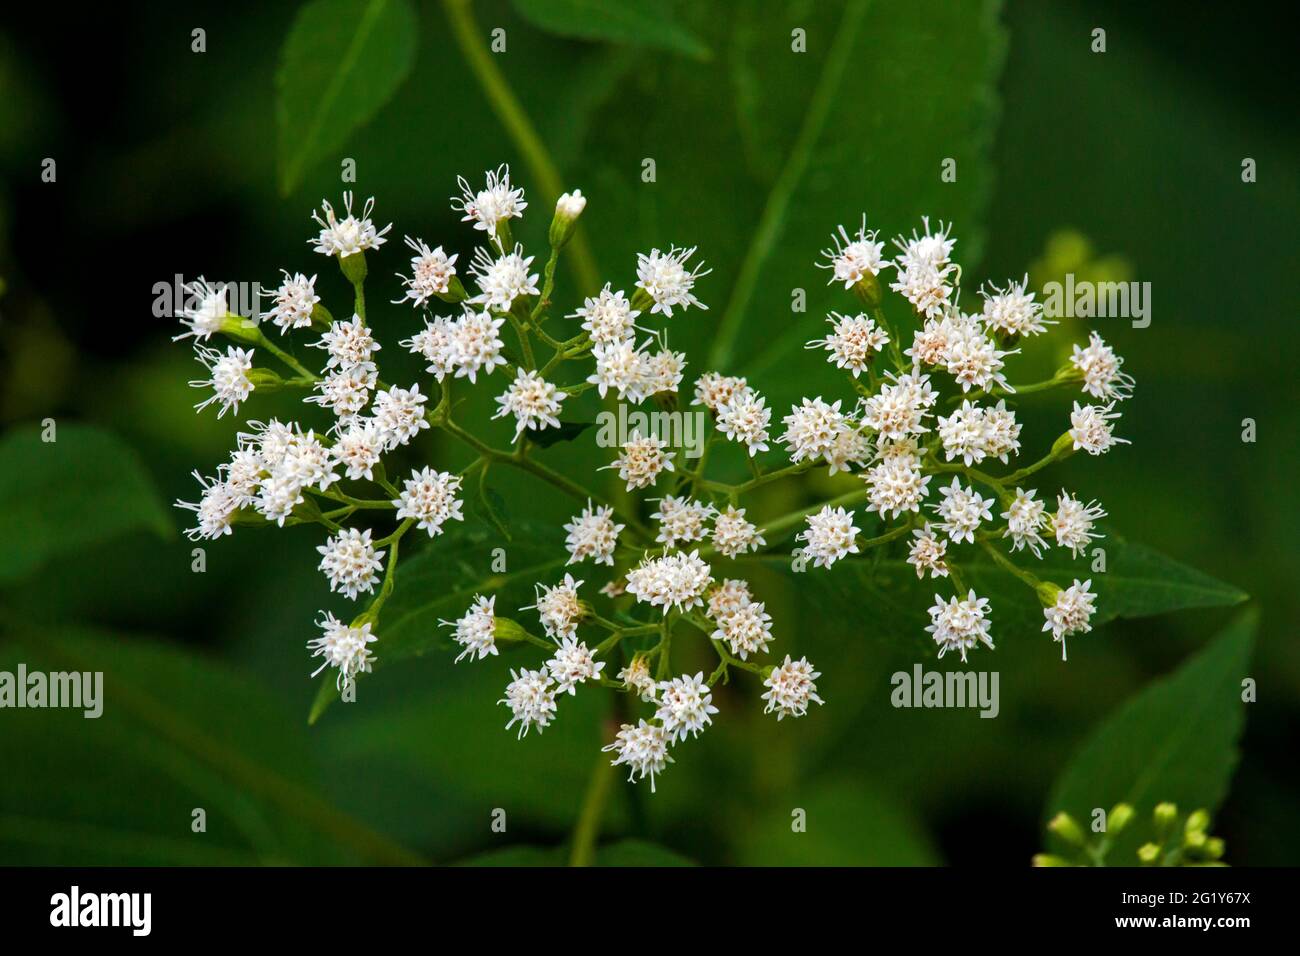 The flowers of White Snakeroot, a poisonus plant frequently found growing growing in moist woodland in eastern North America. If eaten by dairy cows t Stock Photo